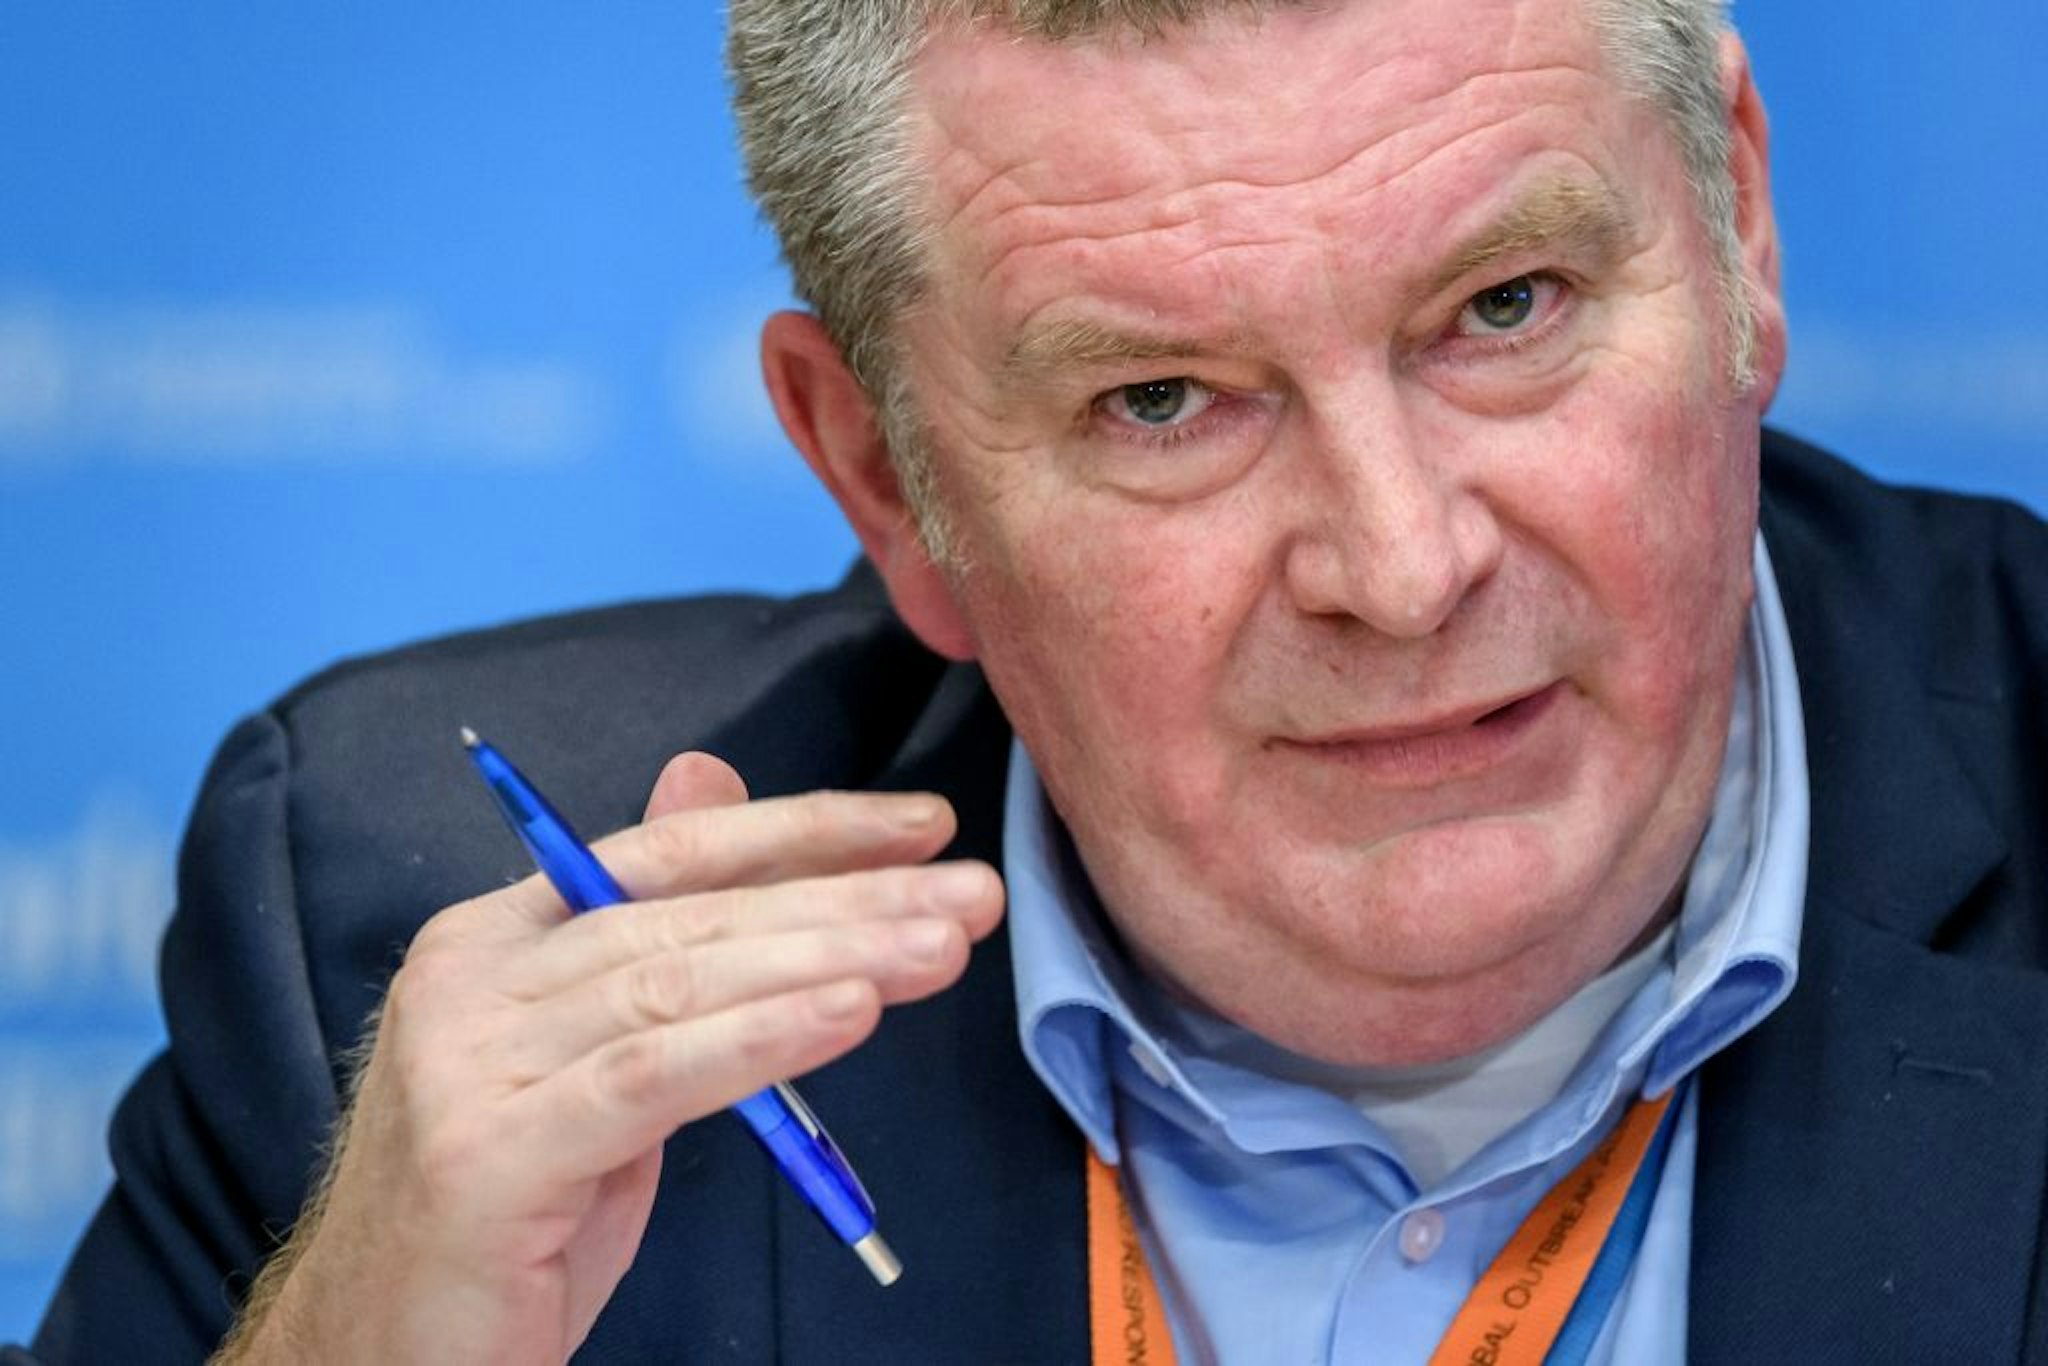 Graphic content / World Health Organization (WHO) Health Emergencies Programme Director Michael Ryan talks during a daily press briefing on COVID-19 virus at the WHO headquarters on March 11, 2020 in Geneva